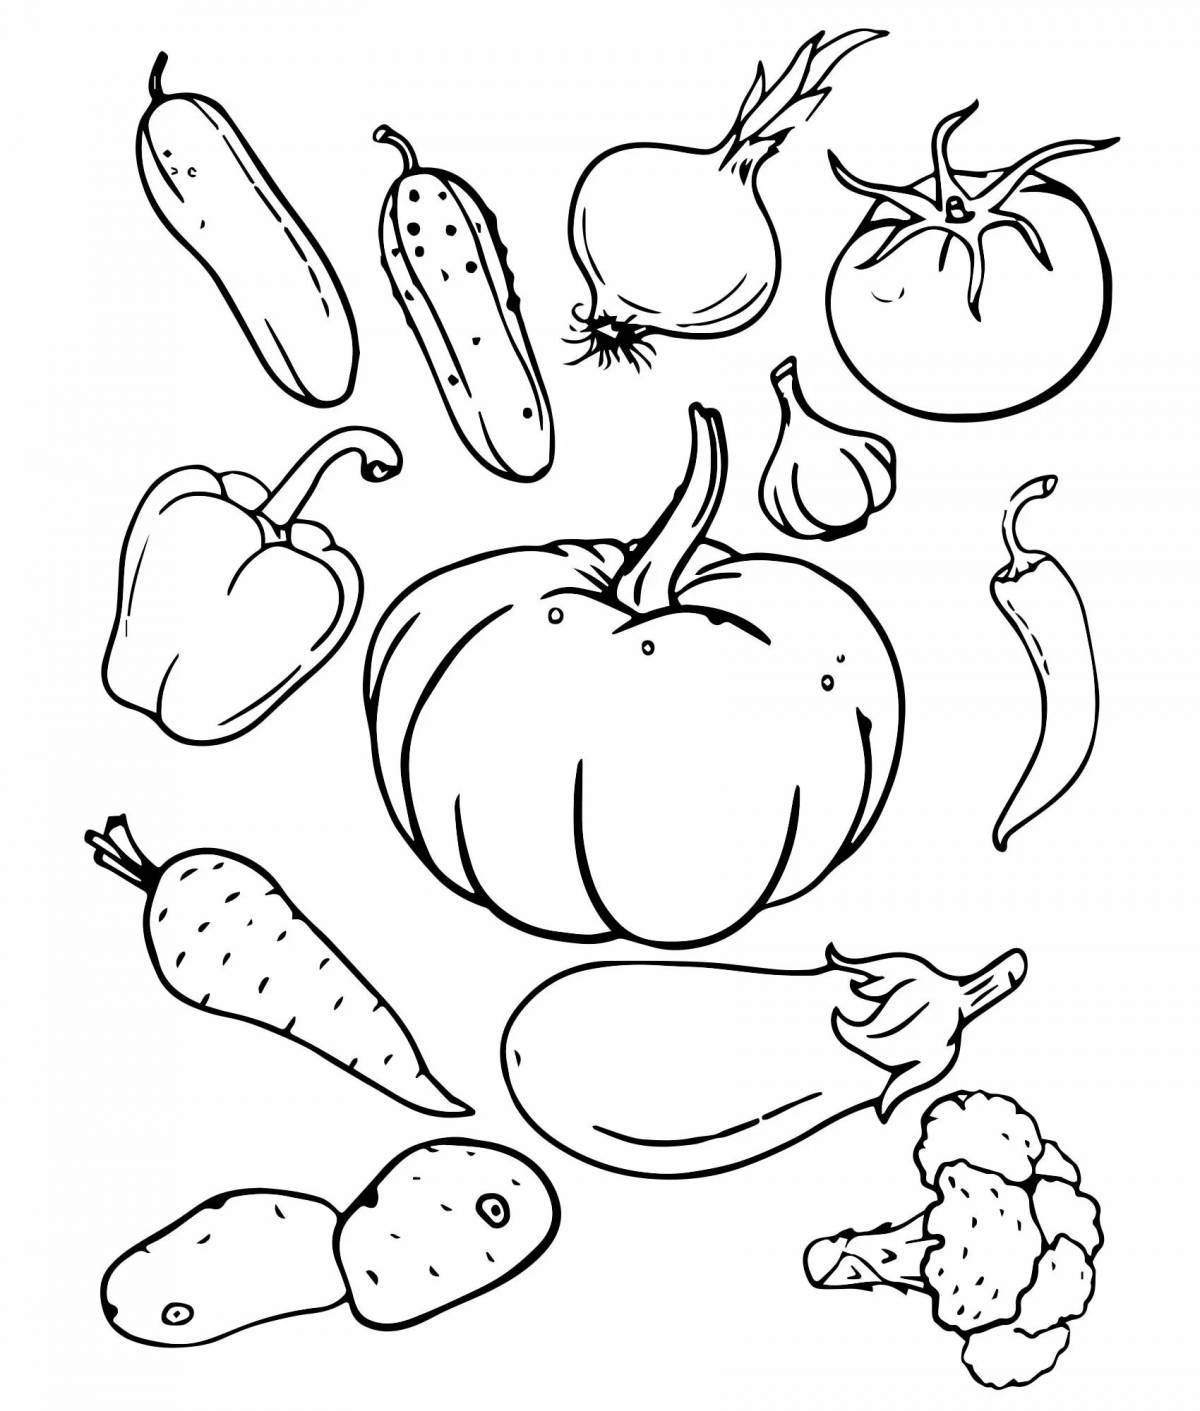 Adorable vegetable coloring book for 3-4 year olds